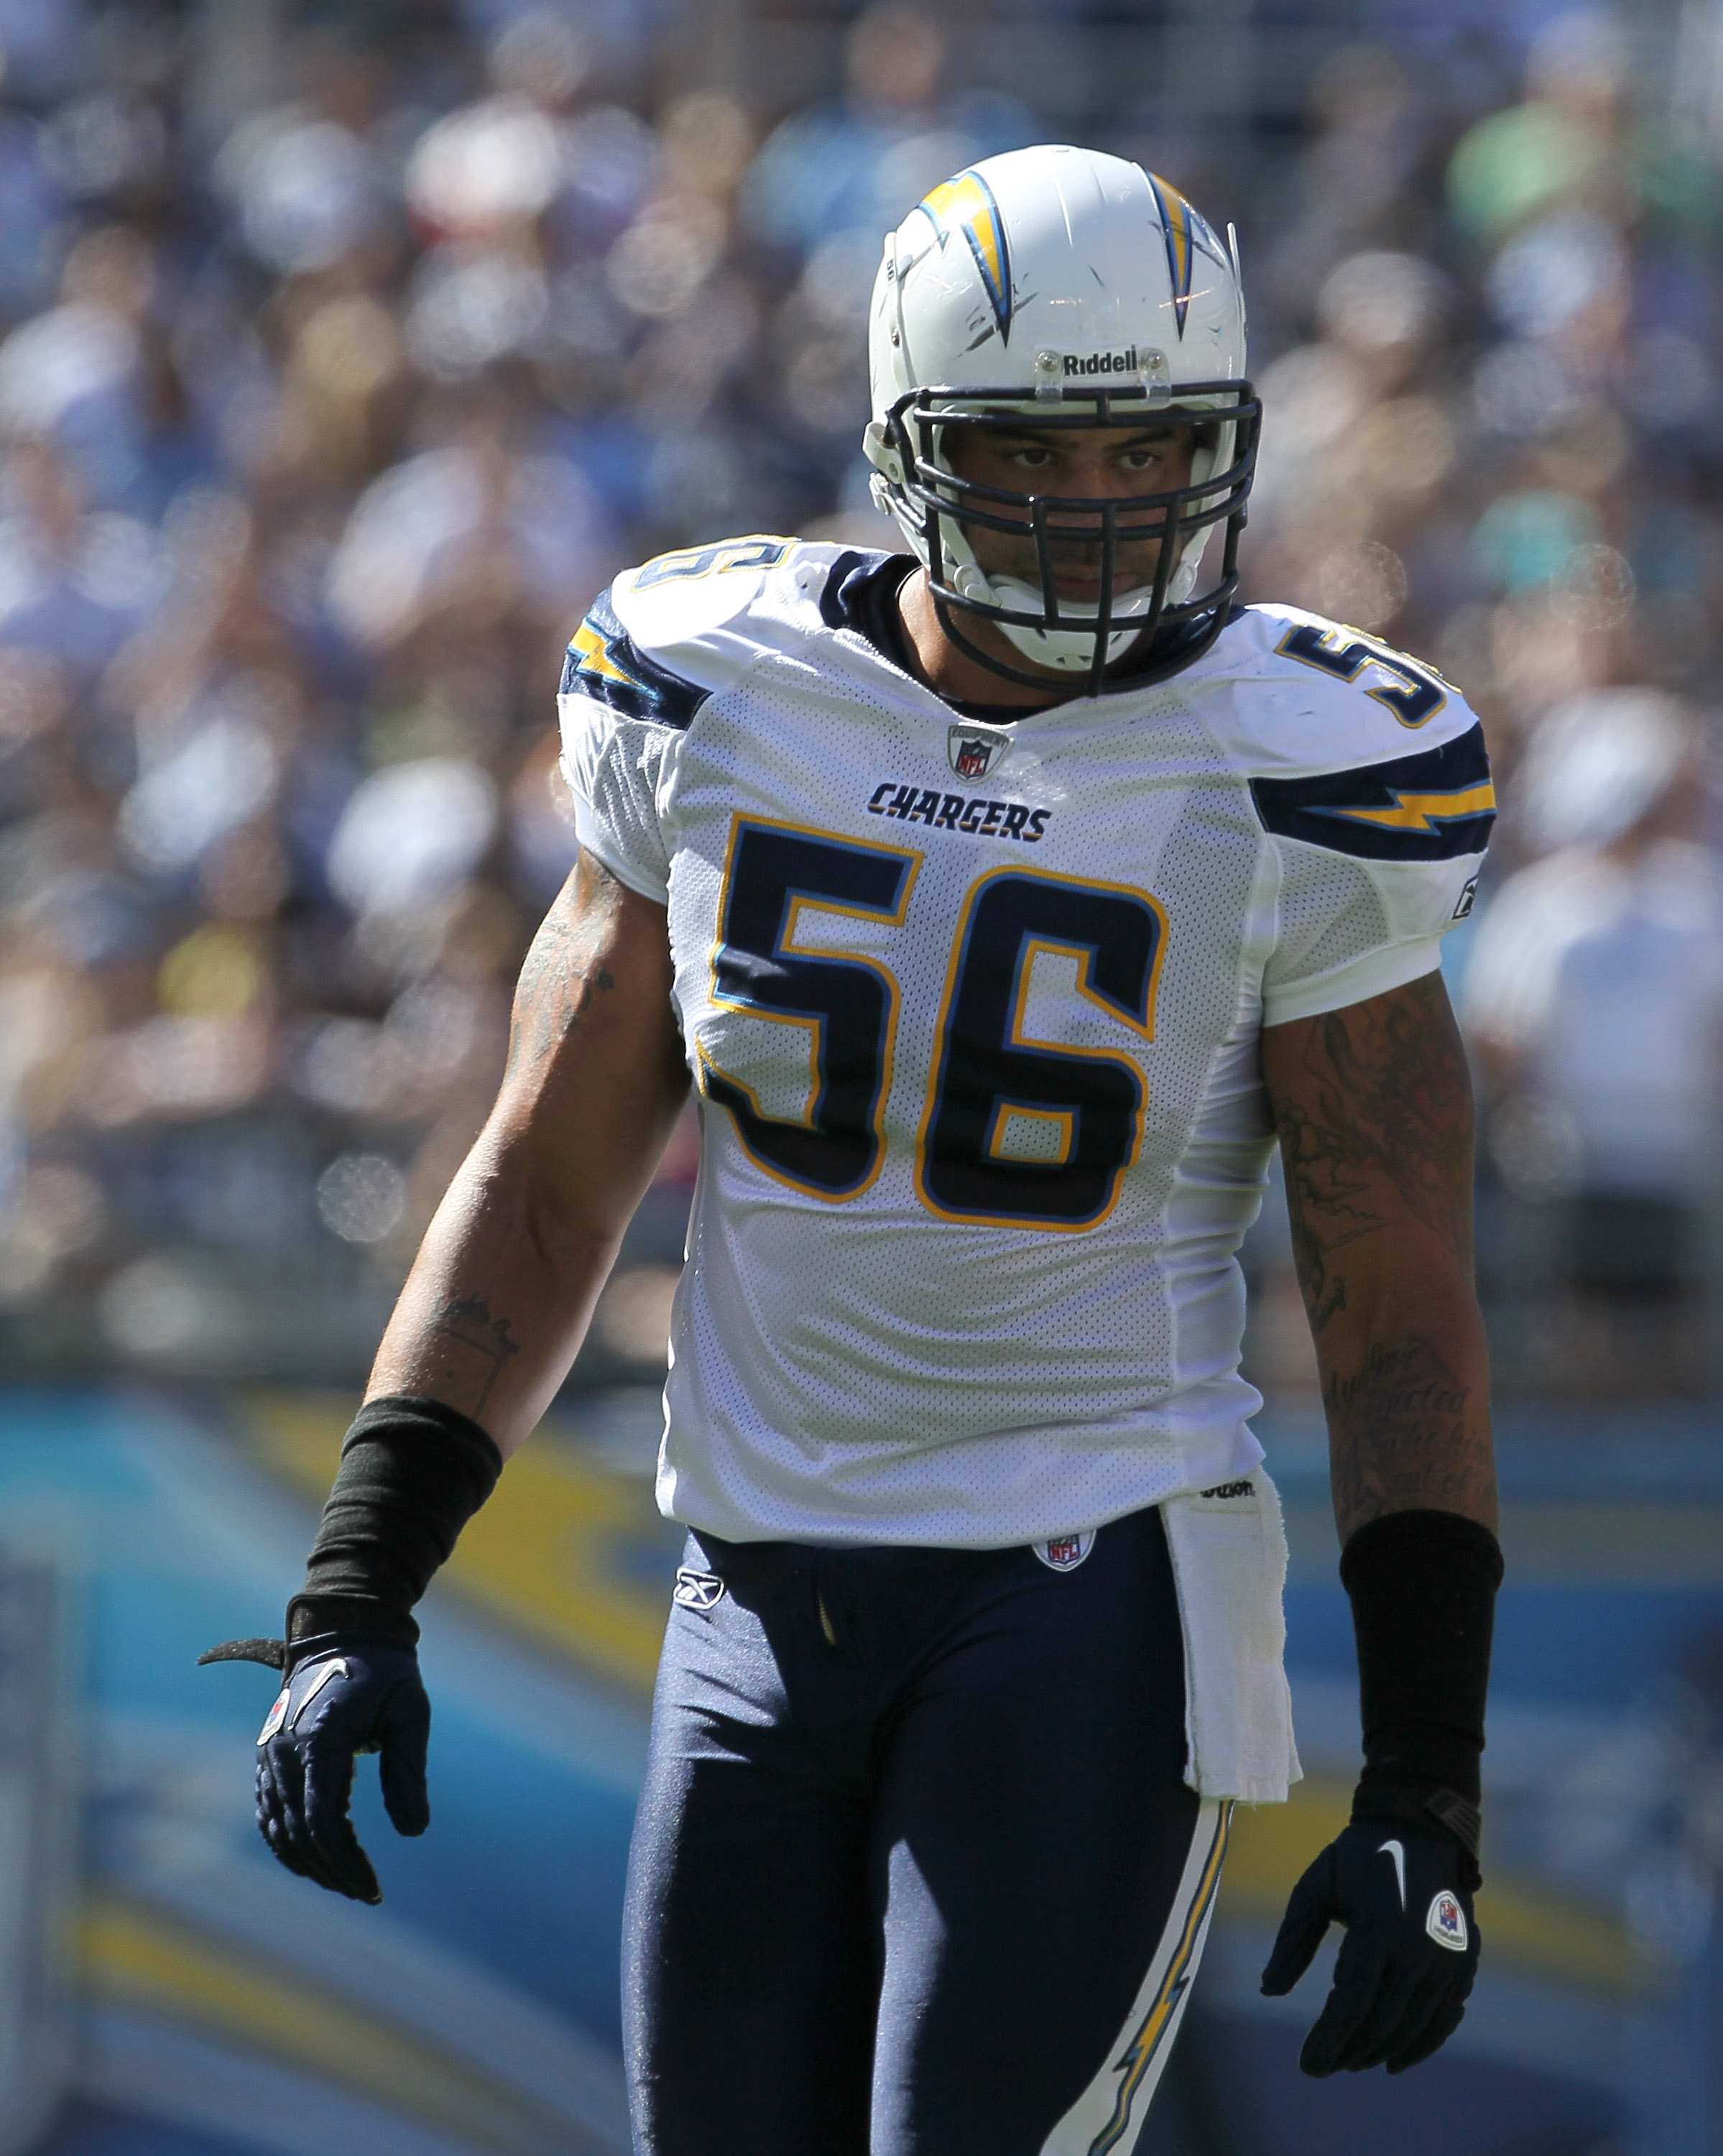 SAN DIEGO - SEPTEMBER 19:  Linebacker Shawne Merriman #56 of the San Diego Chargers waits on the line of scrimmage against the Jacksonville Jaguars at Qualcomm Stadium on September 19, 2010 in San Diego, California. The Chargers won 38-13.  (Photo by Step